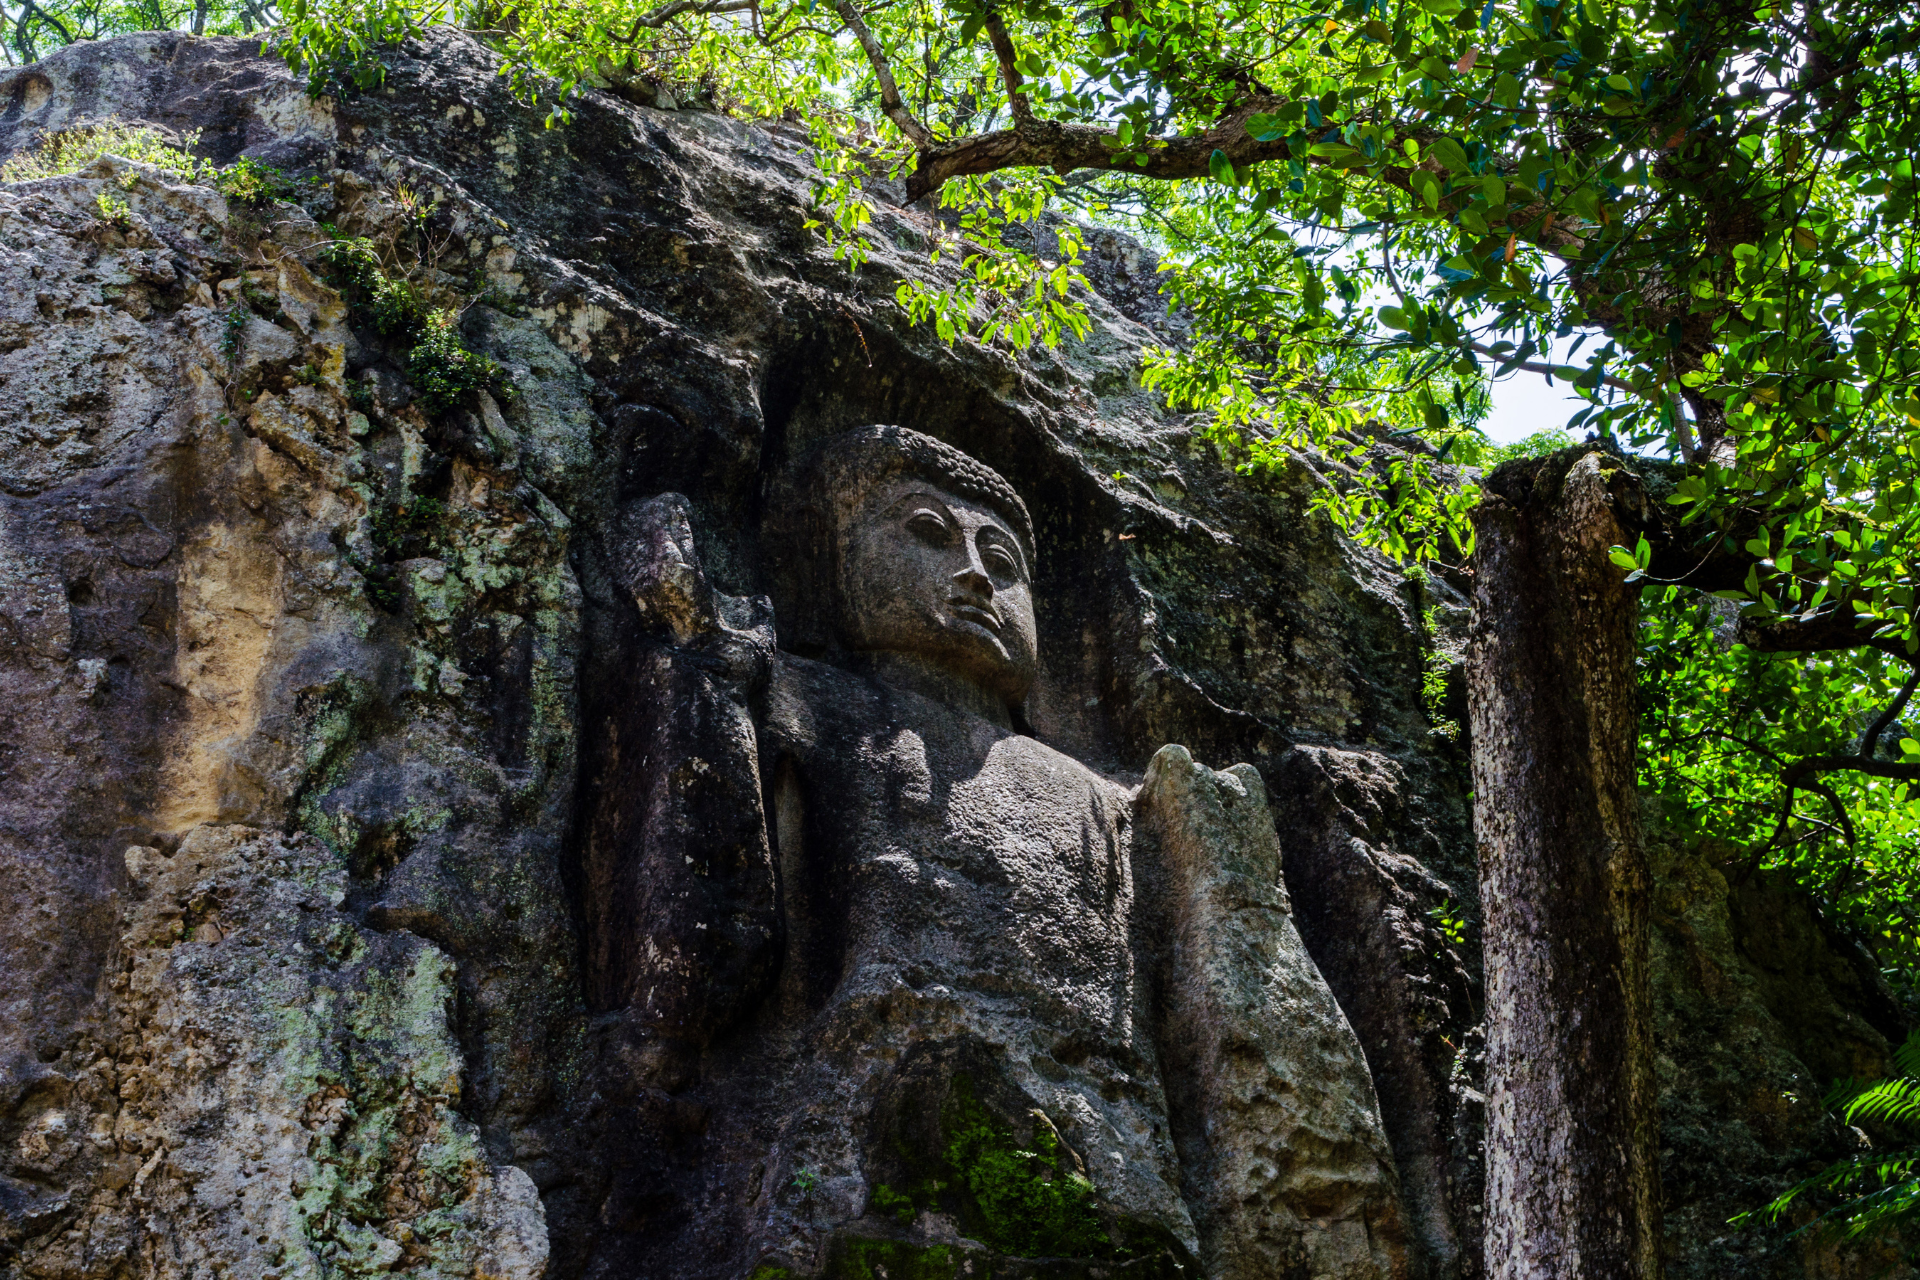 The Buddha Statue at Dhowa Rock Temple.